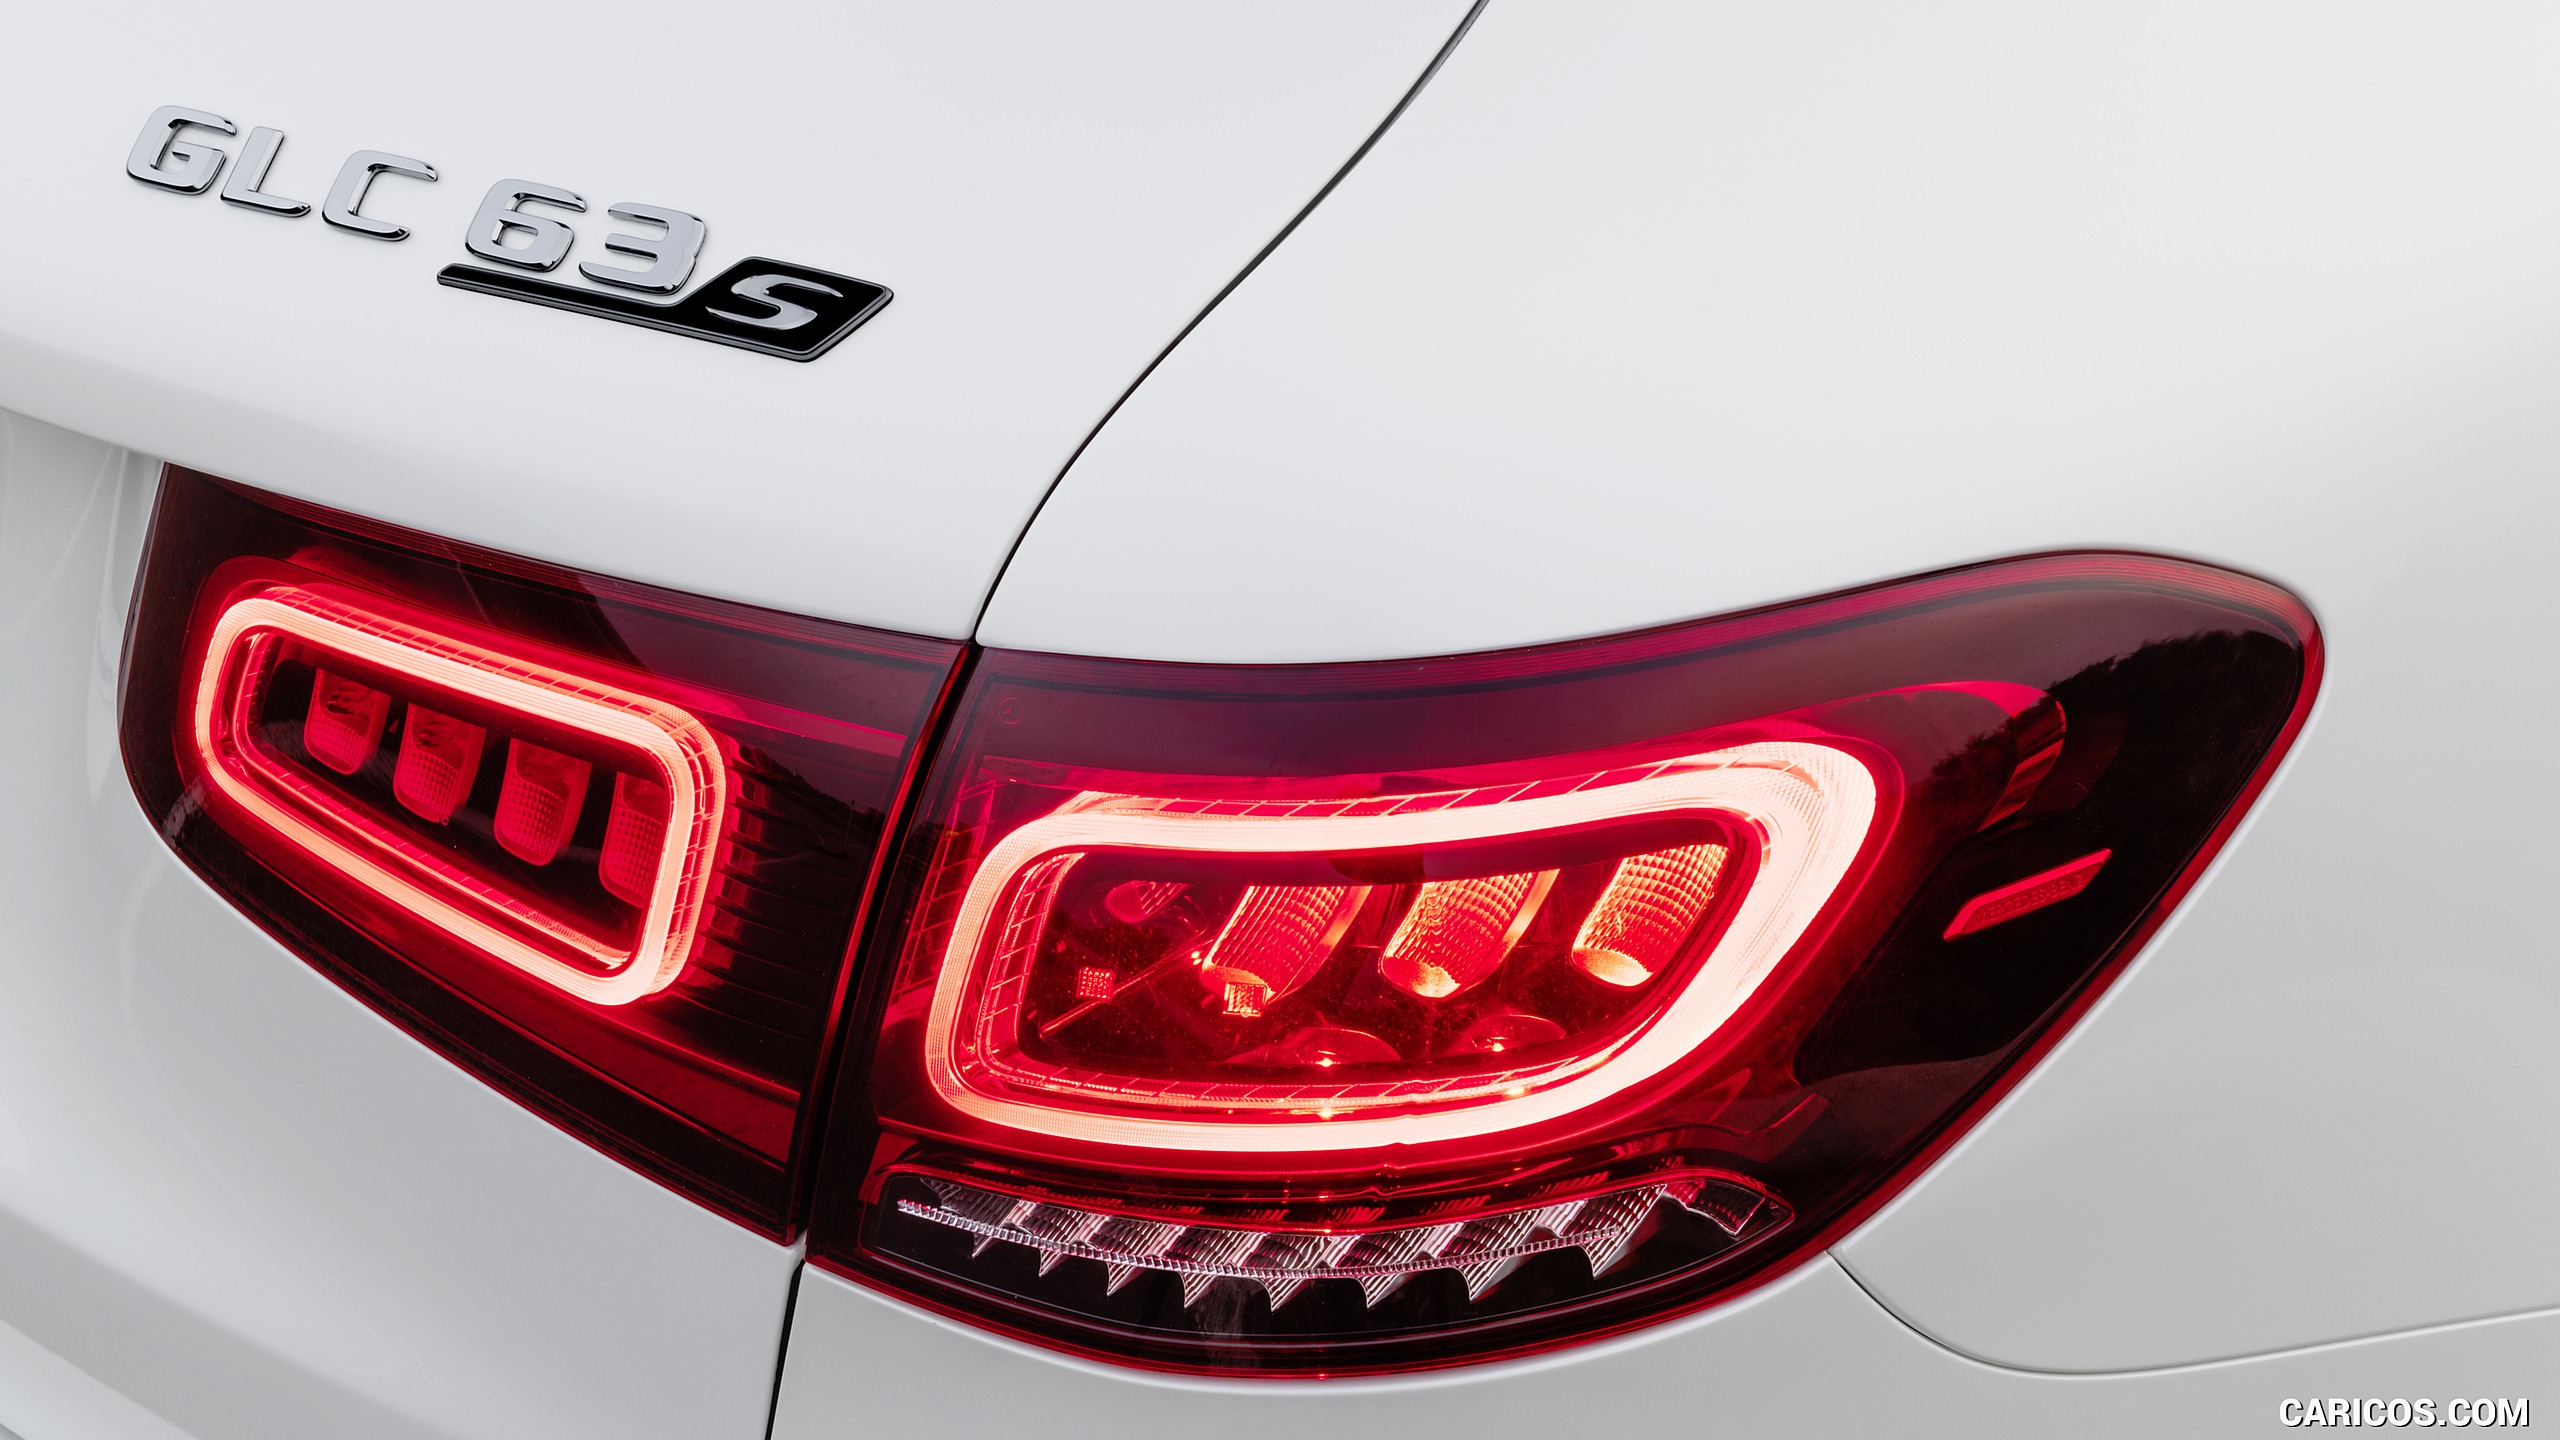 2020 Mercedes-AMG GLC 63 S 4MATIC+ - Tail Light, #30 of 118